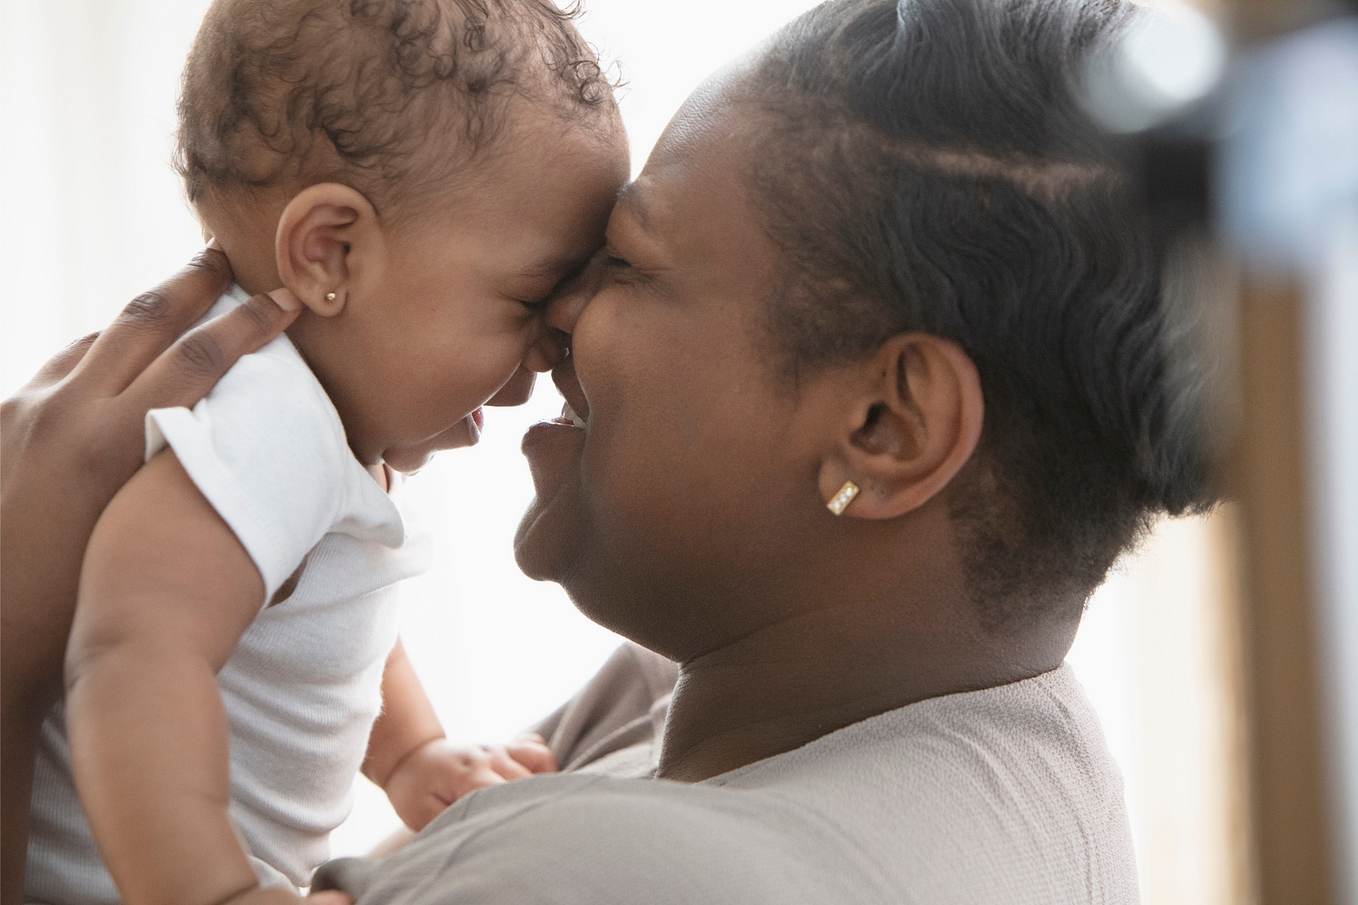 Black woman and her baby. Racism in healthcare